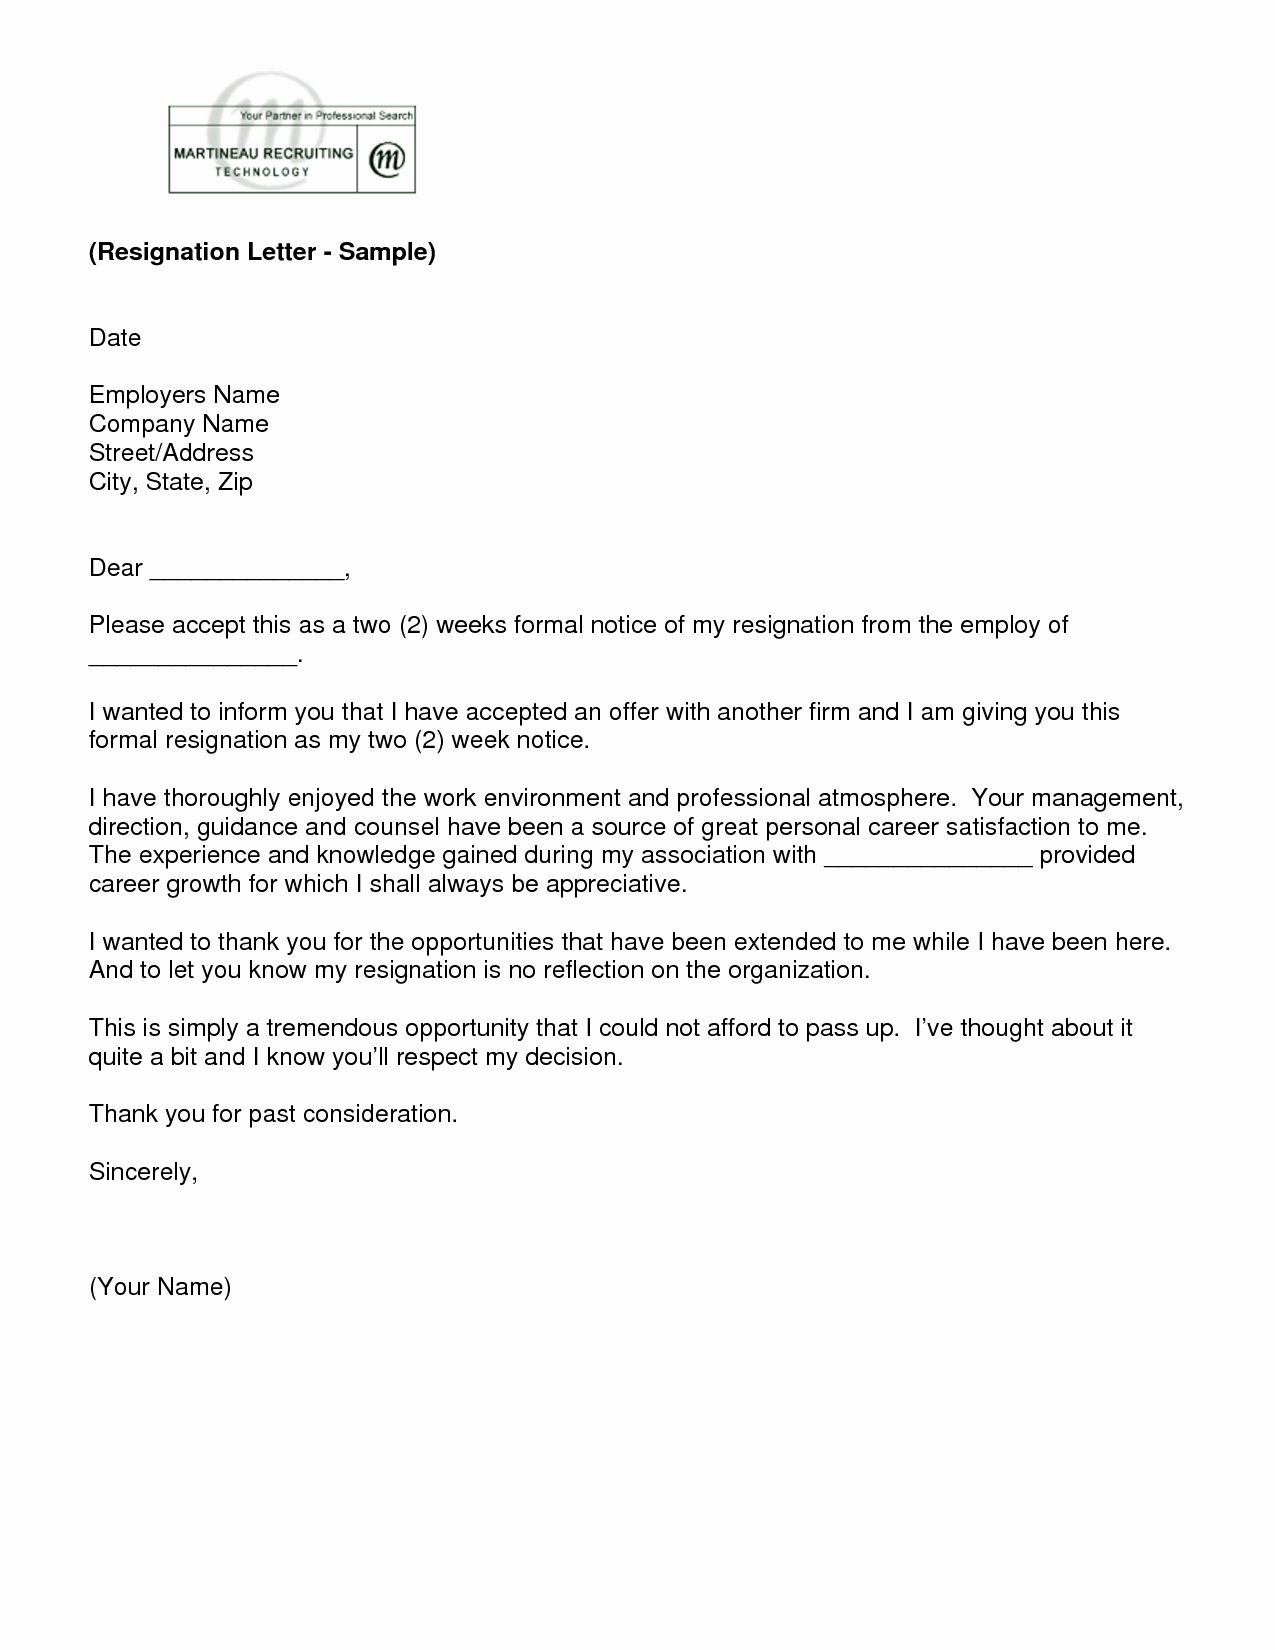 Sample Of Two Weeks Notice Letter Unique Letter Of Resignation 2 Weeks Notice Template